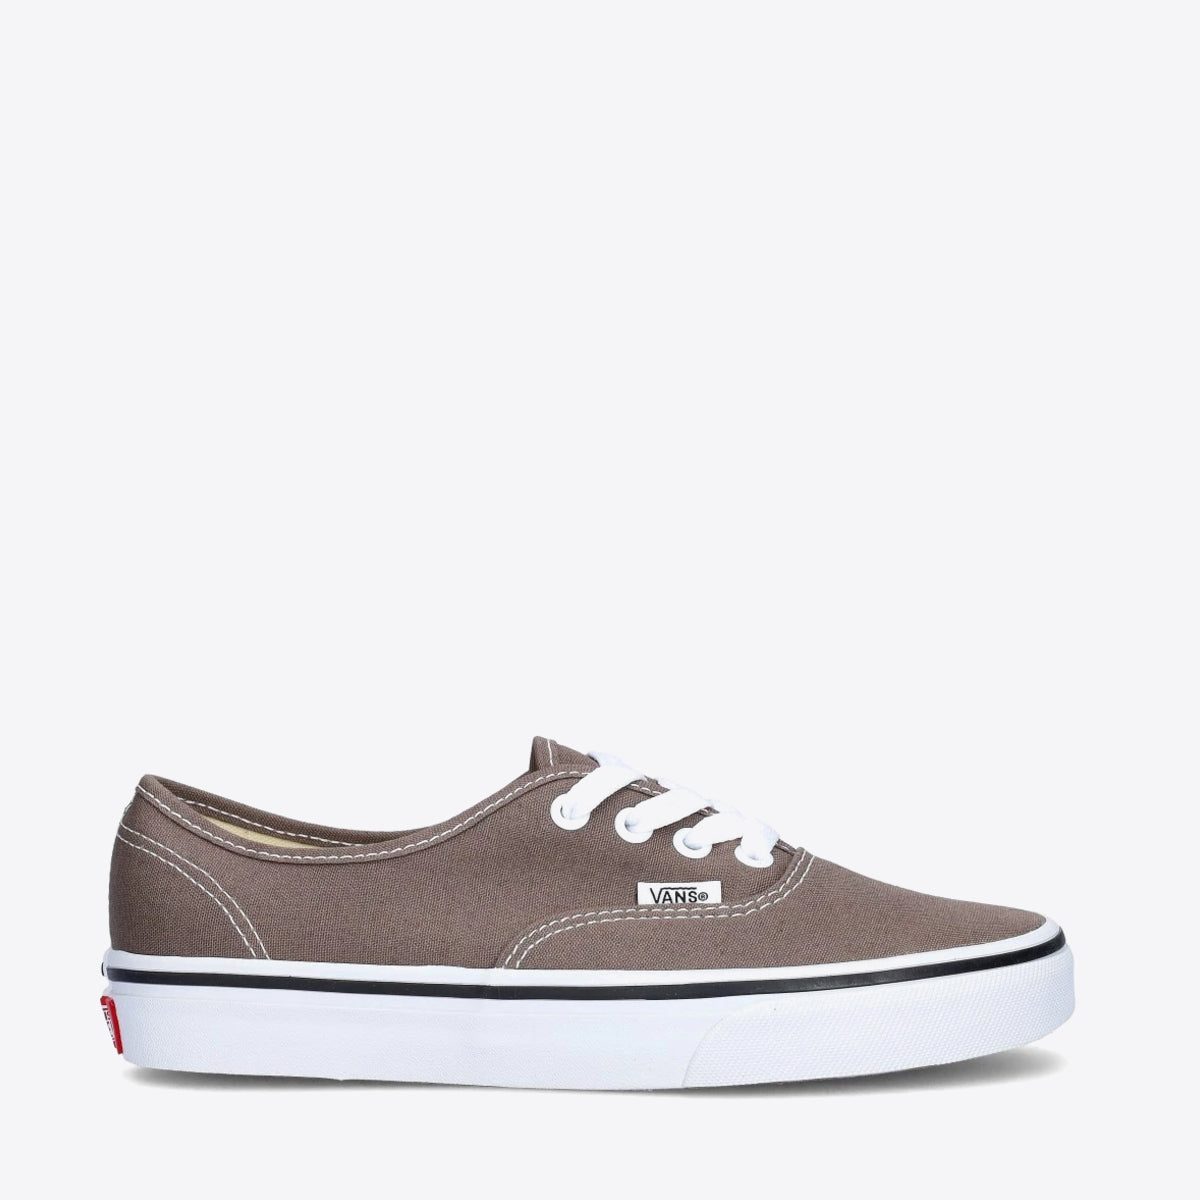 VANS Authentic Colour Theory Bungee Cord - Image 1